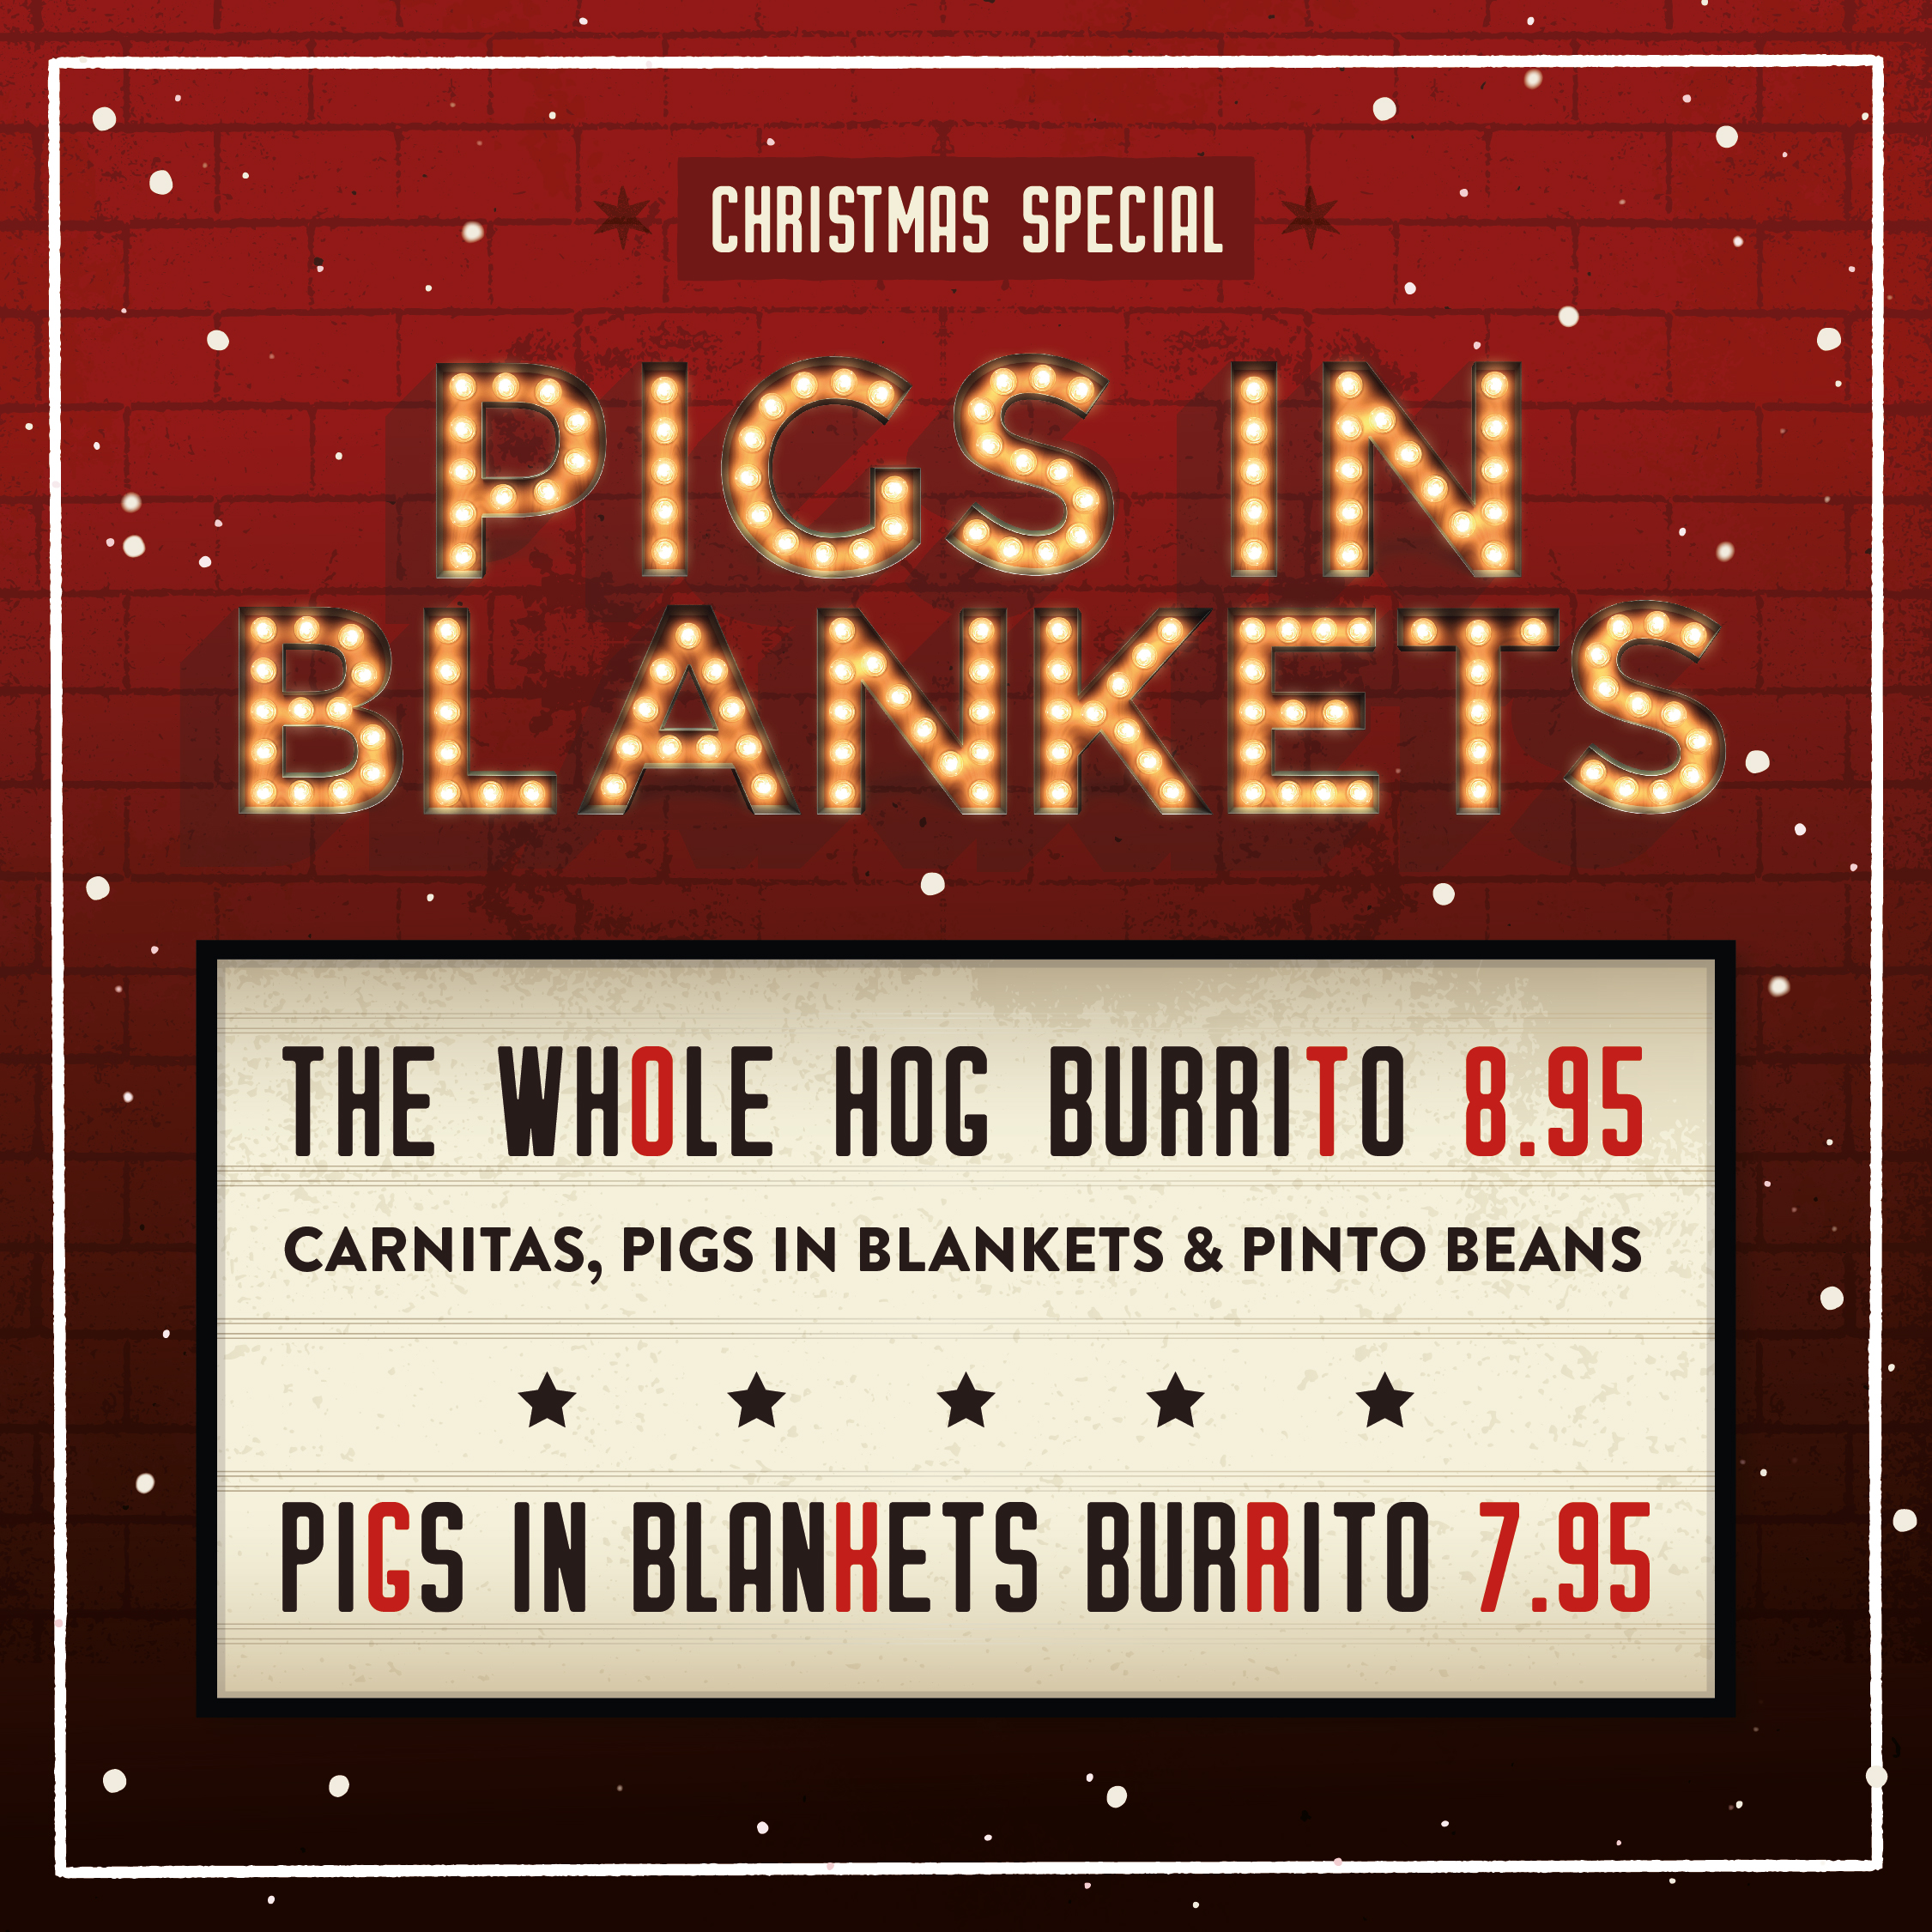 Festive burrito Pigs in blankets or the whole hog